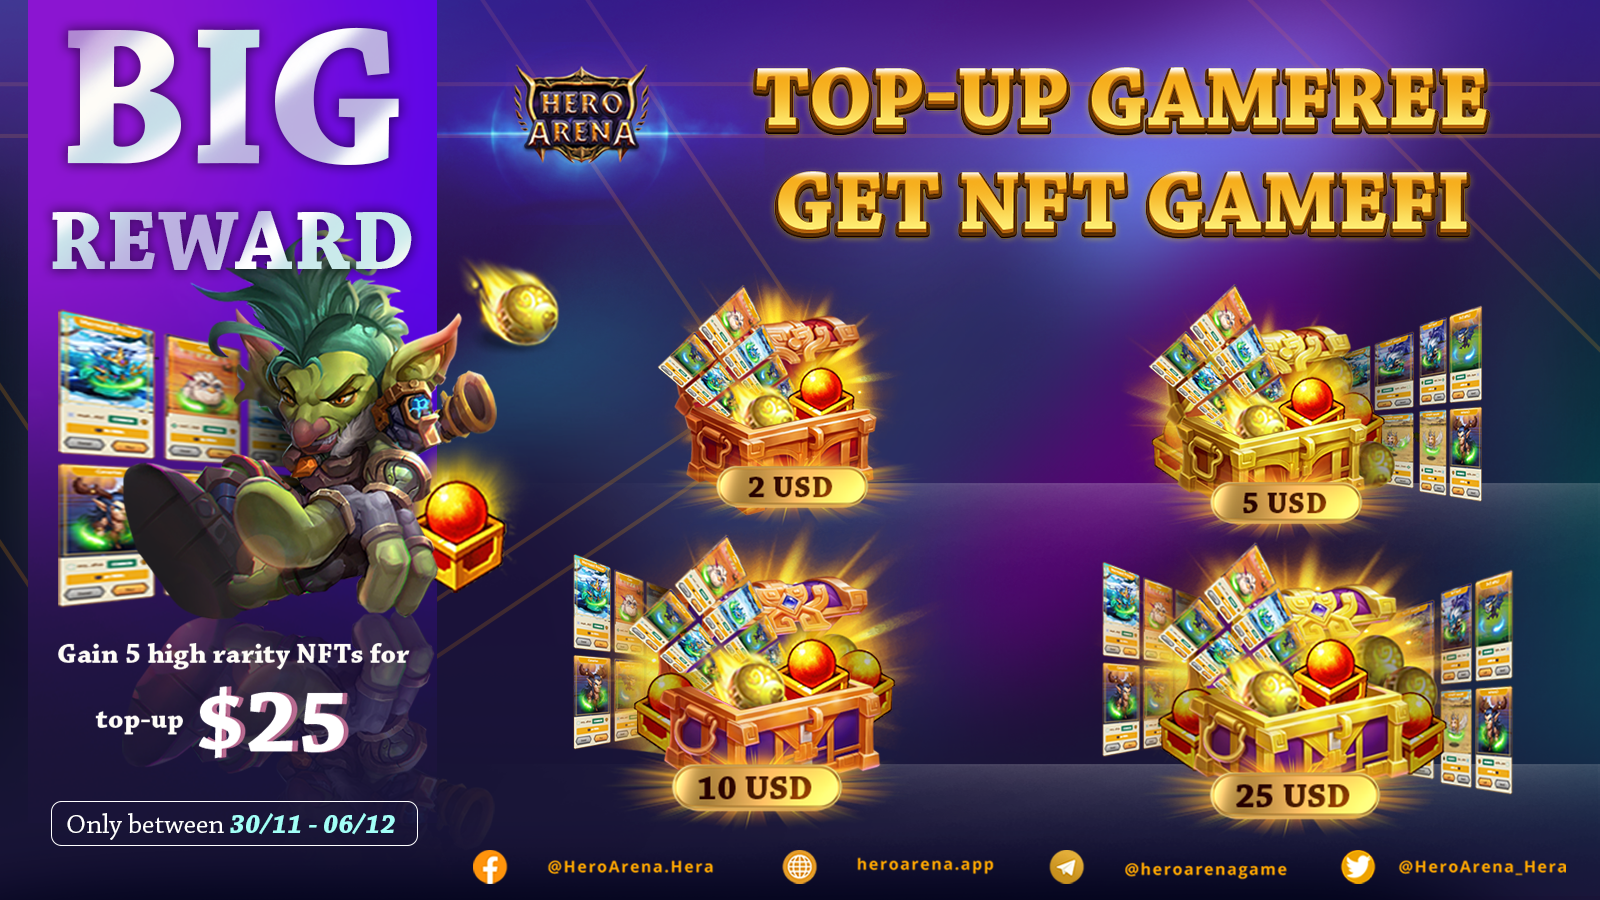 GameFi and Marketing: The Top 5 Play-to-Earn and NFT Games